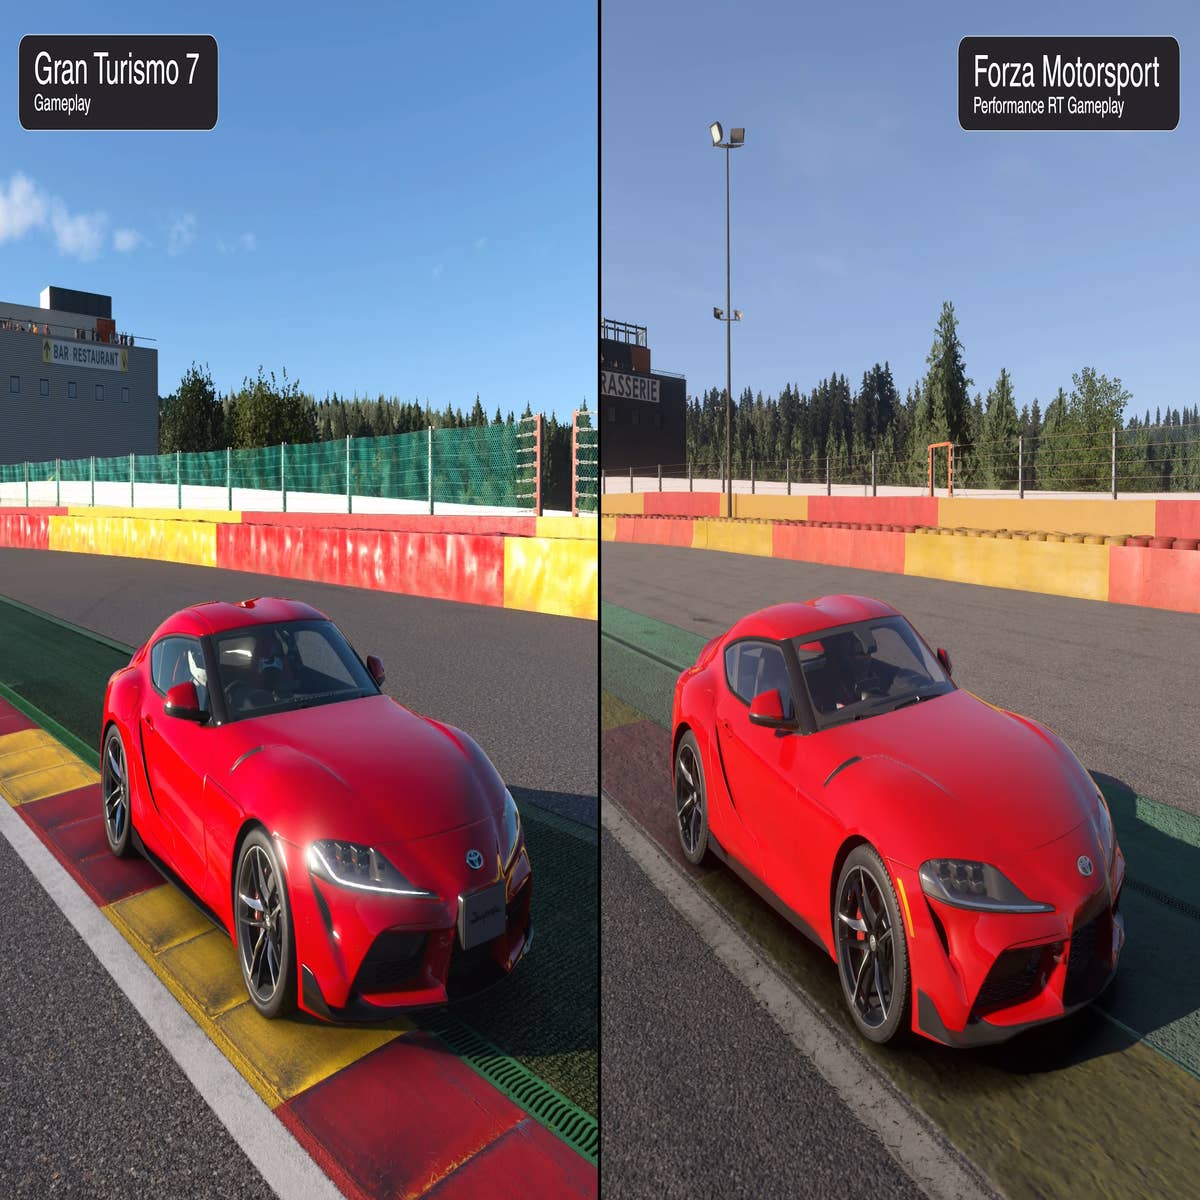 New Gran Turismo 7 Details: PS4 vs PS5, Driving Physics, GT Cafe